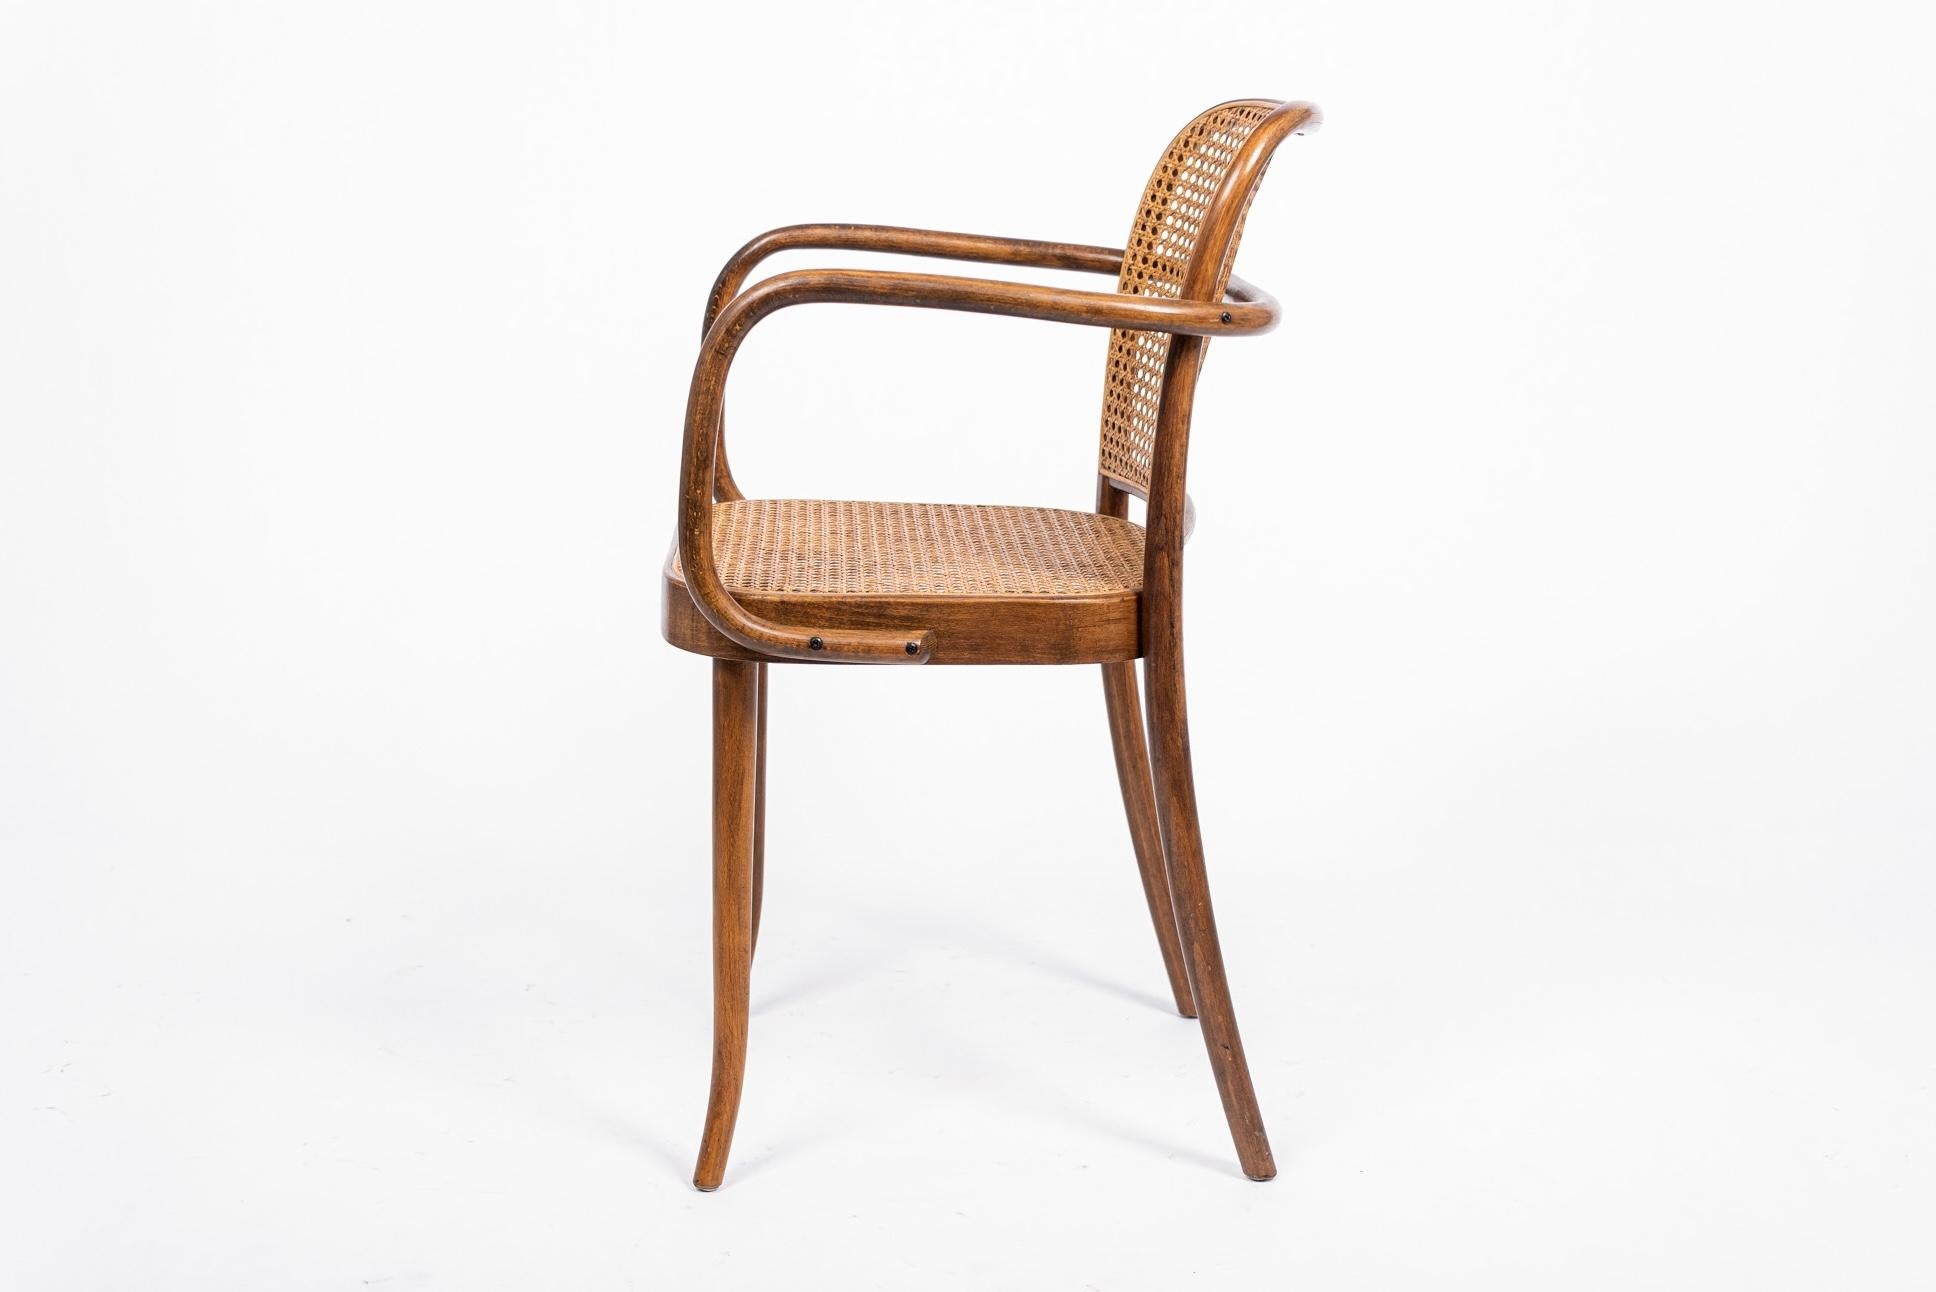 Hand-Woven Midcentury Bentwood & Cane Cafe Chair by Joseph Hoffman for Stendig